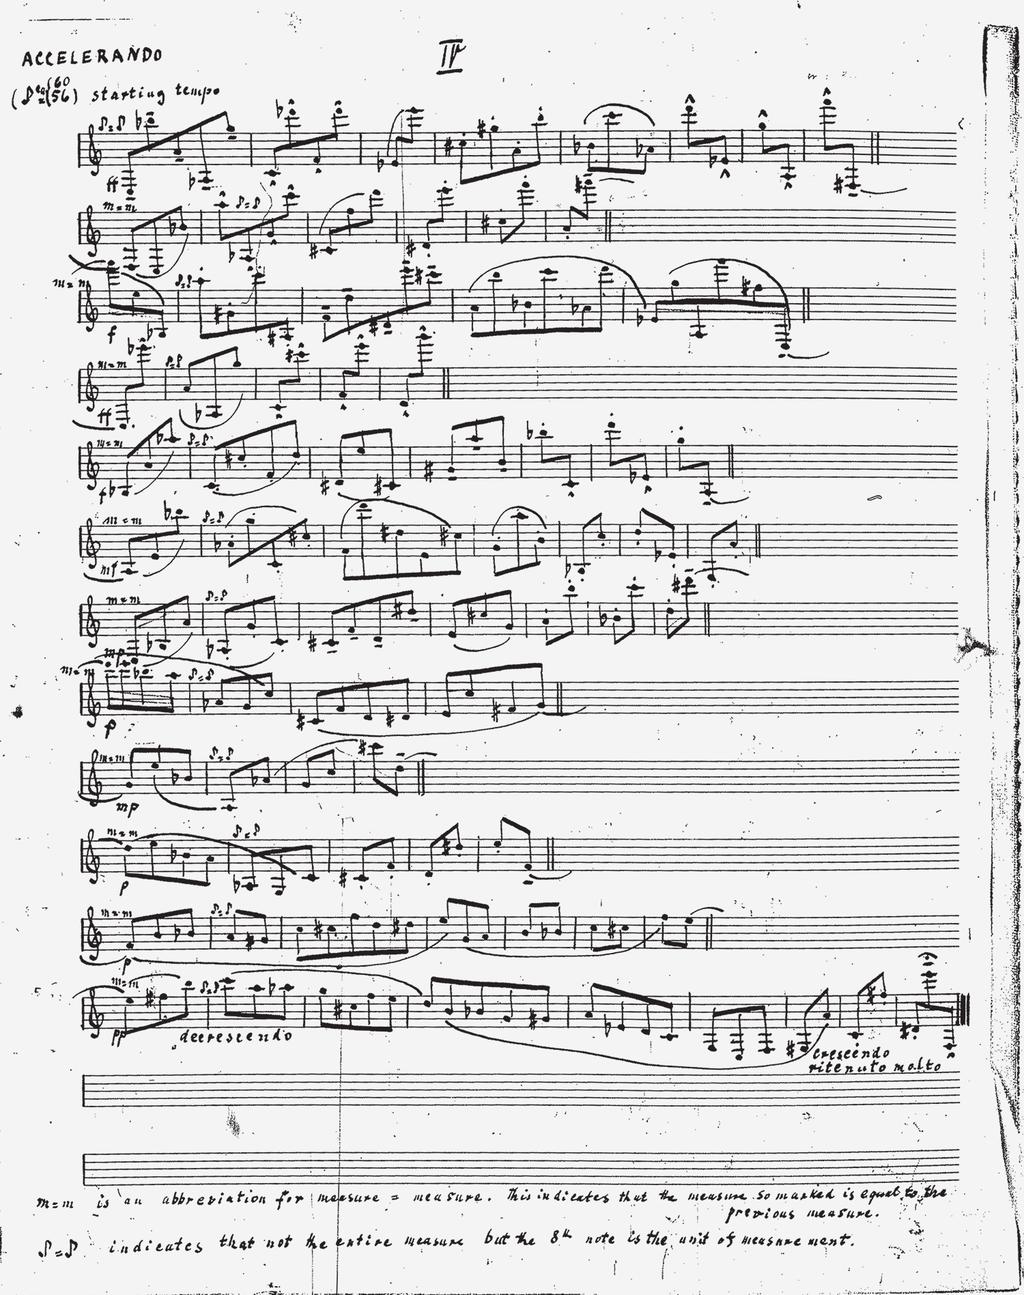 Suite for Clarinet I, fourth movement; manuscript held in the